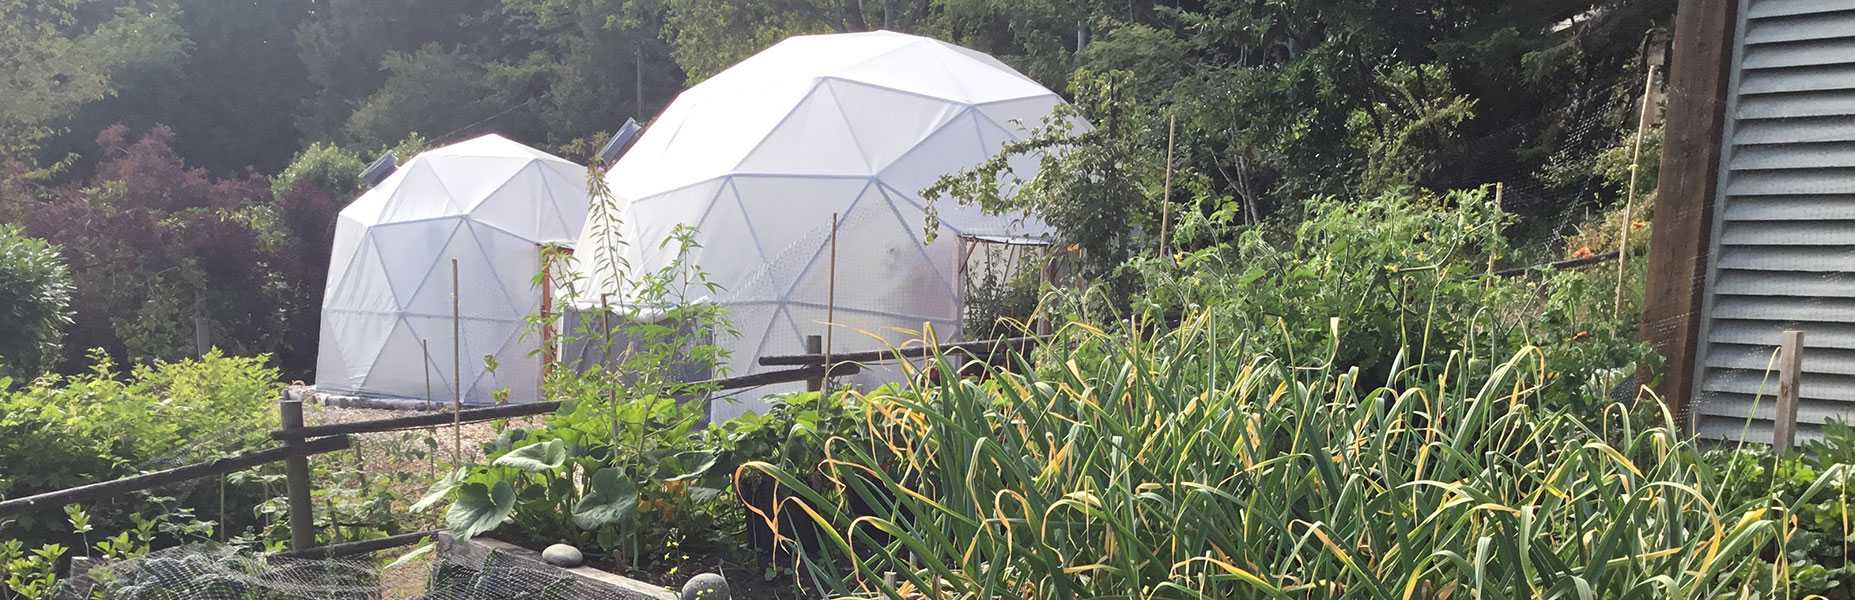 Winter Greenhouse Gardening in a Growing Dome